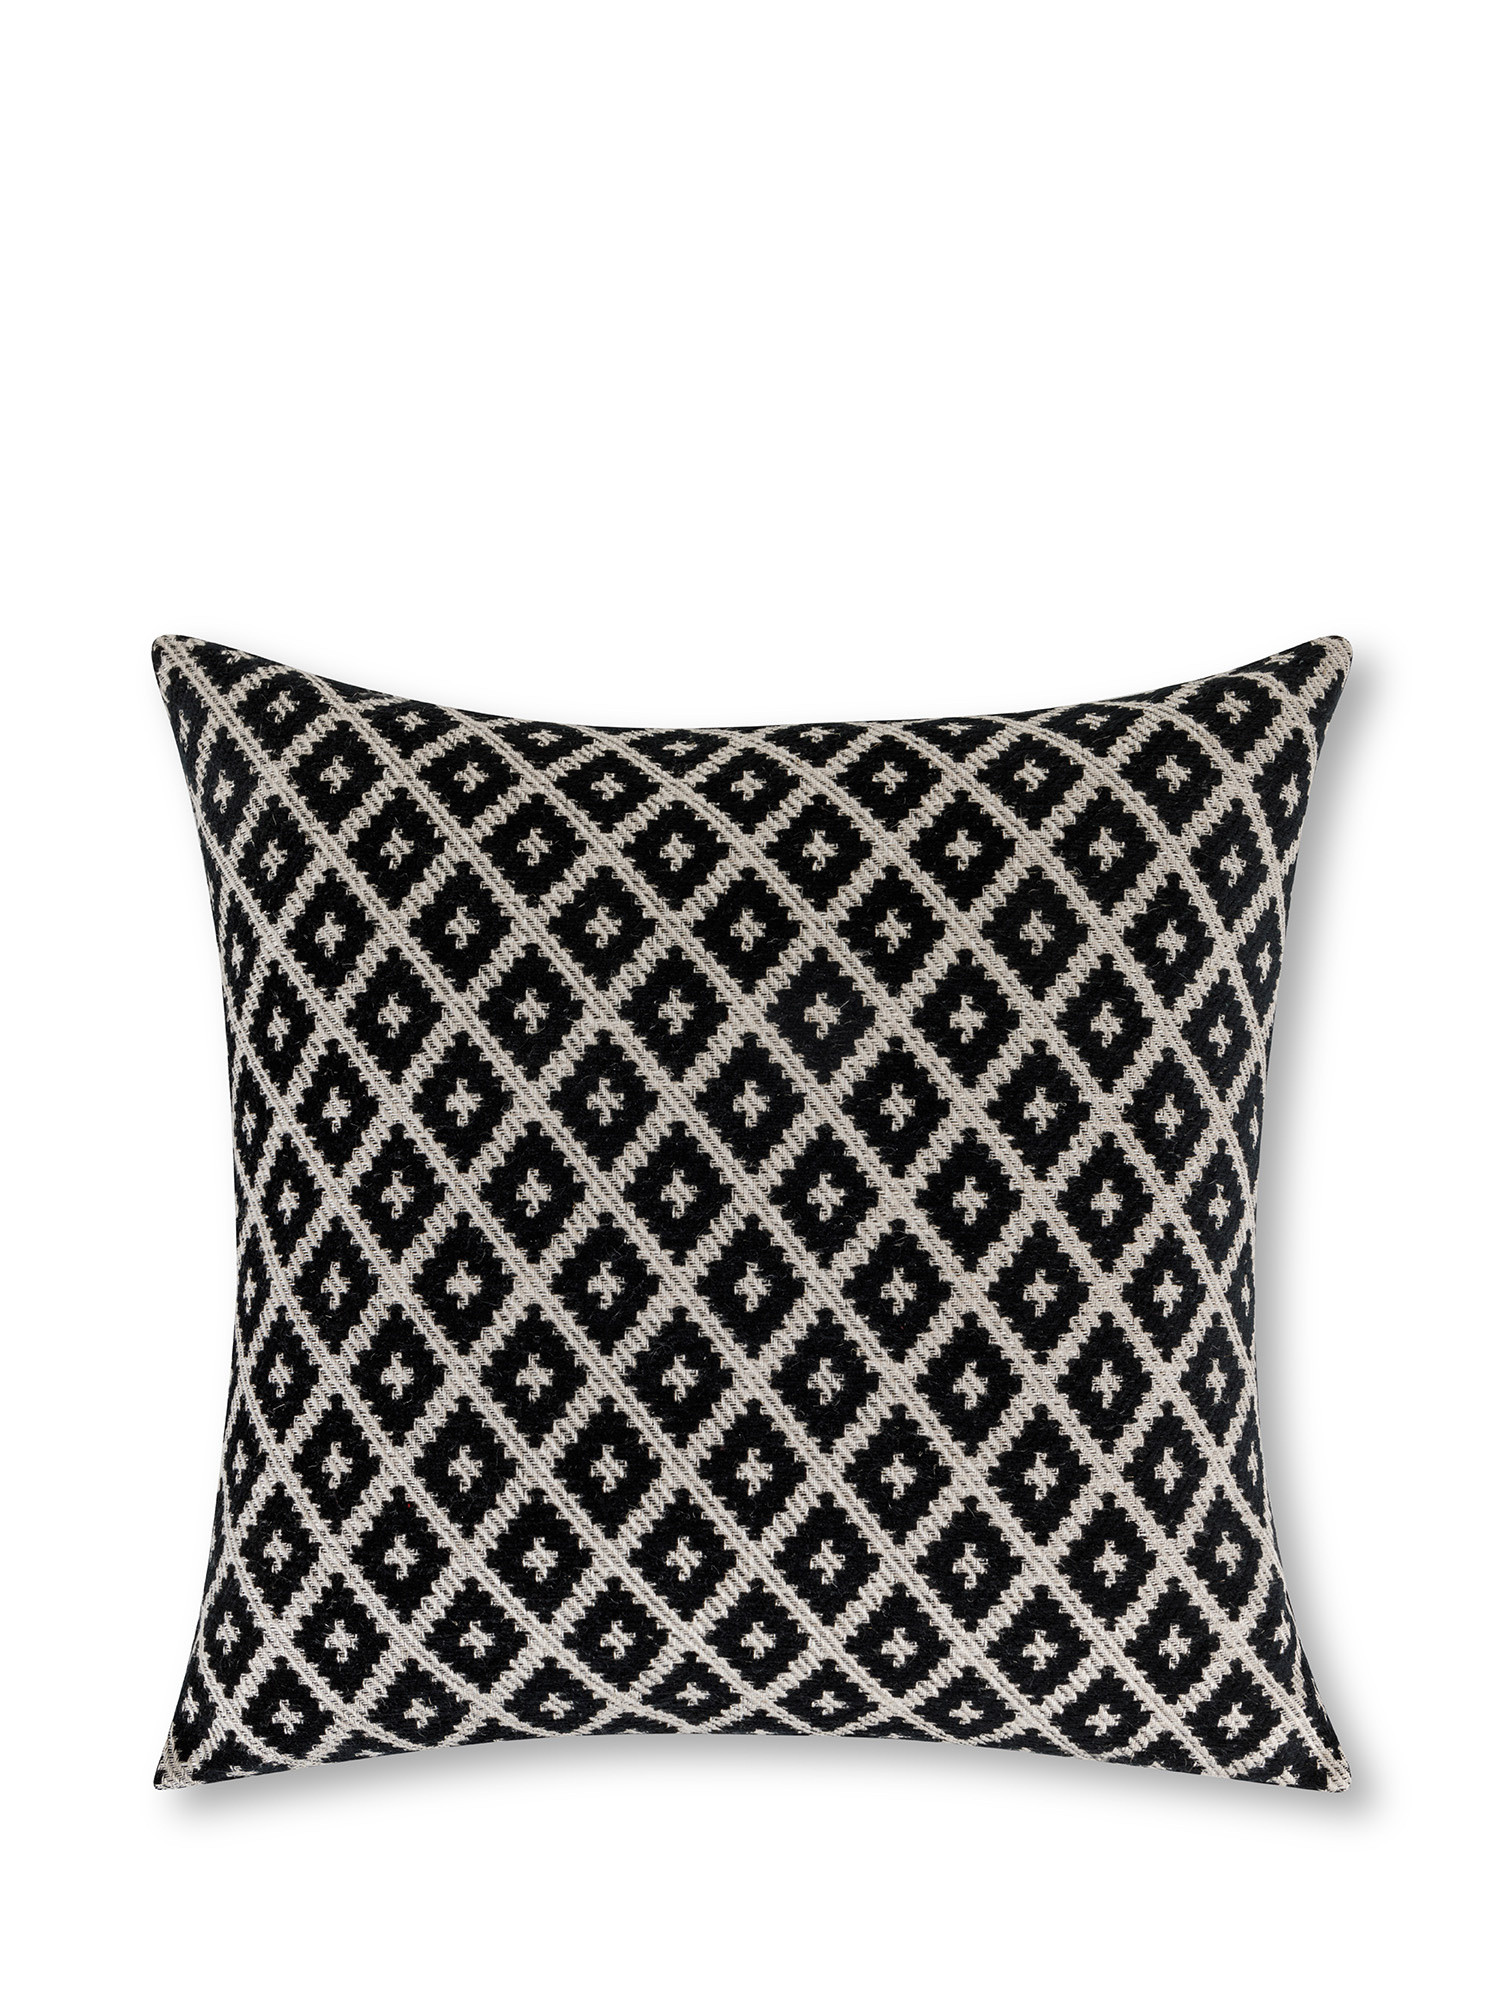 Cushion in jacquard fabric with geometric pattern 45x45 cm, White, large